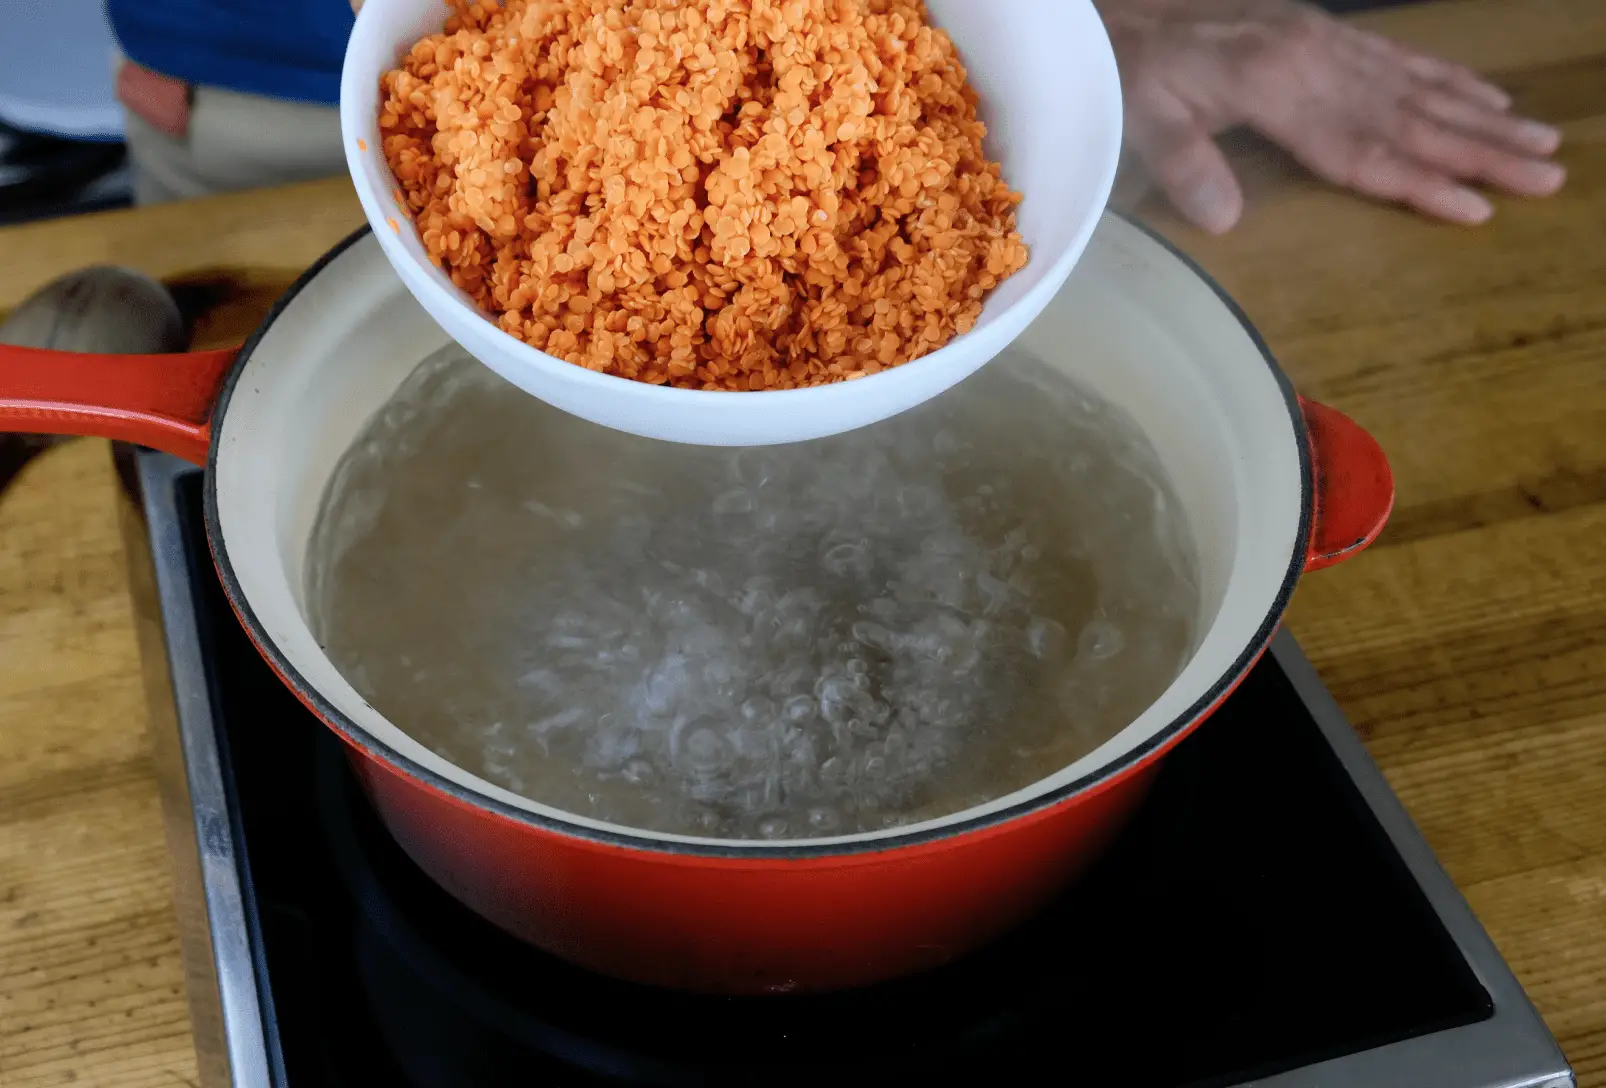 RED LENTILS BLANCHING